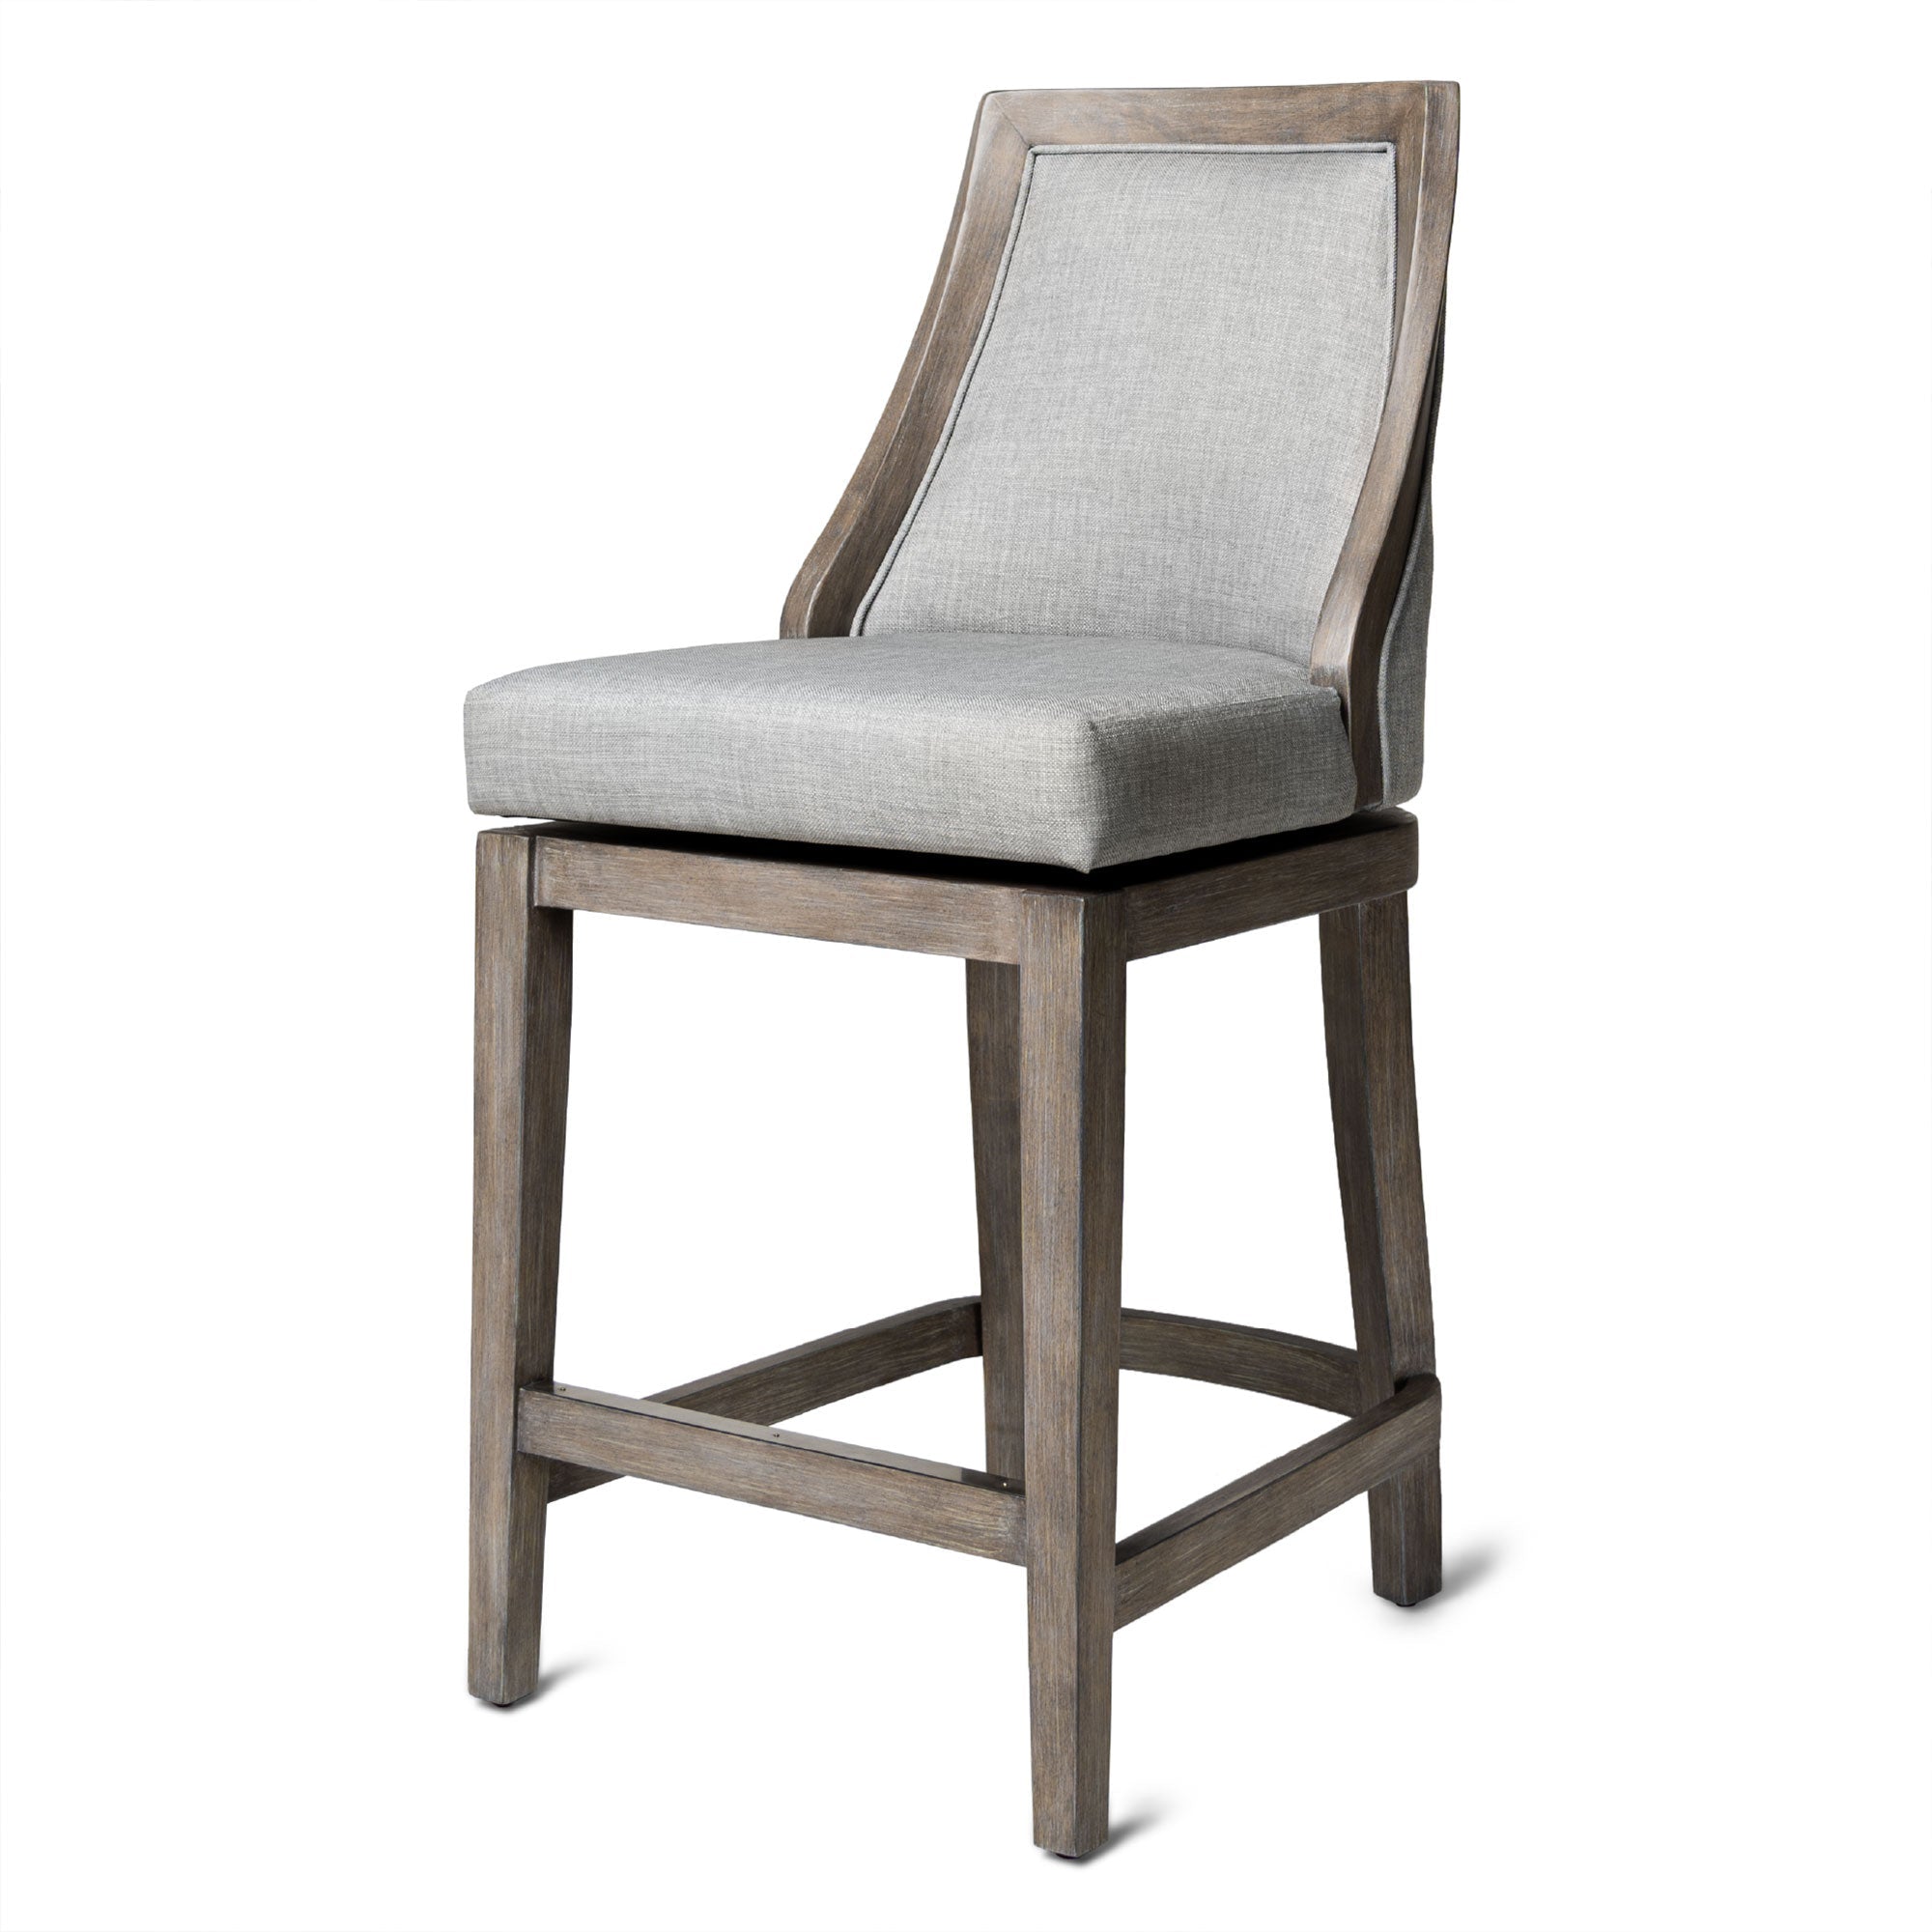 Vienna Counter Stool in Reclaimed Oak Finish with Ash Grey Fabric Upholstery in Stools by Maven Lane